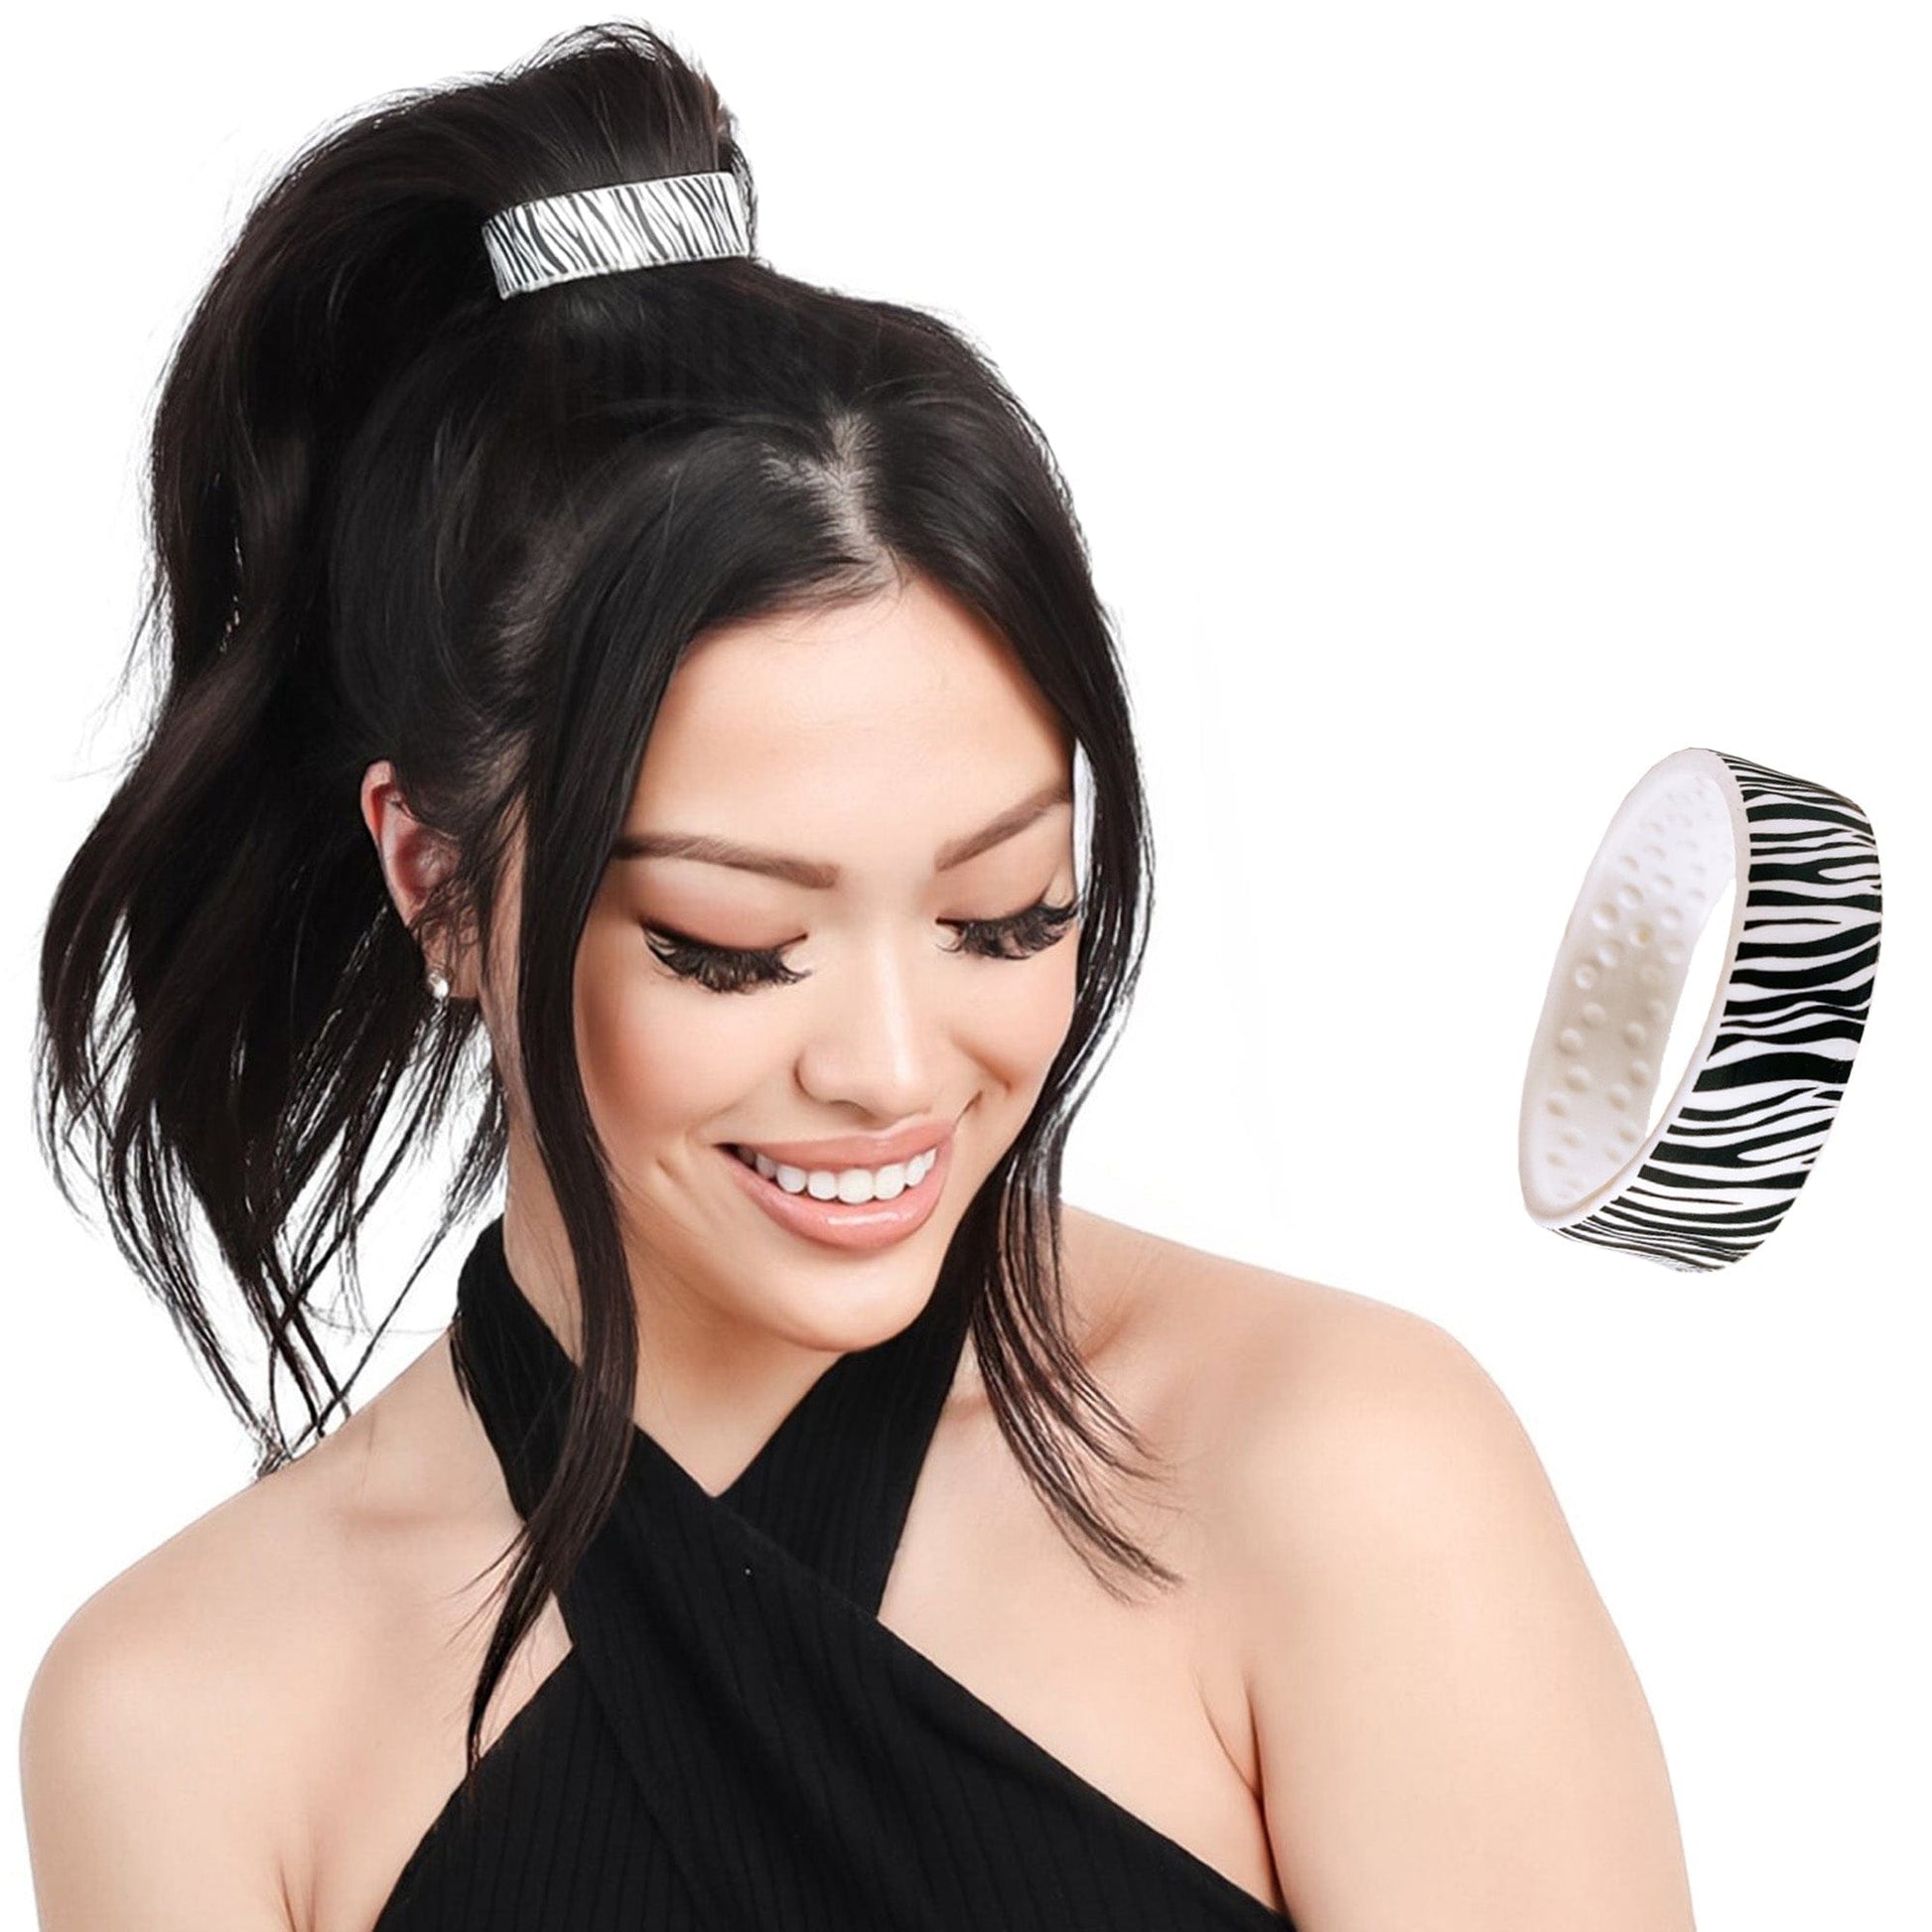 Zebra Limited Edition Designer PONY-O. This larger size is perfect for ponytails and all-up styles.